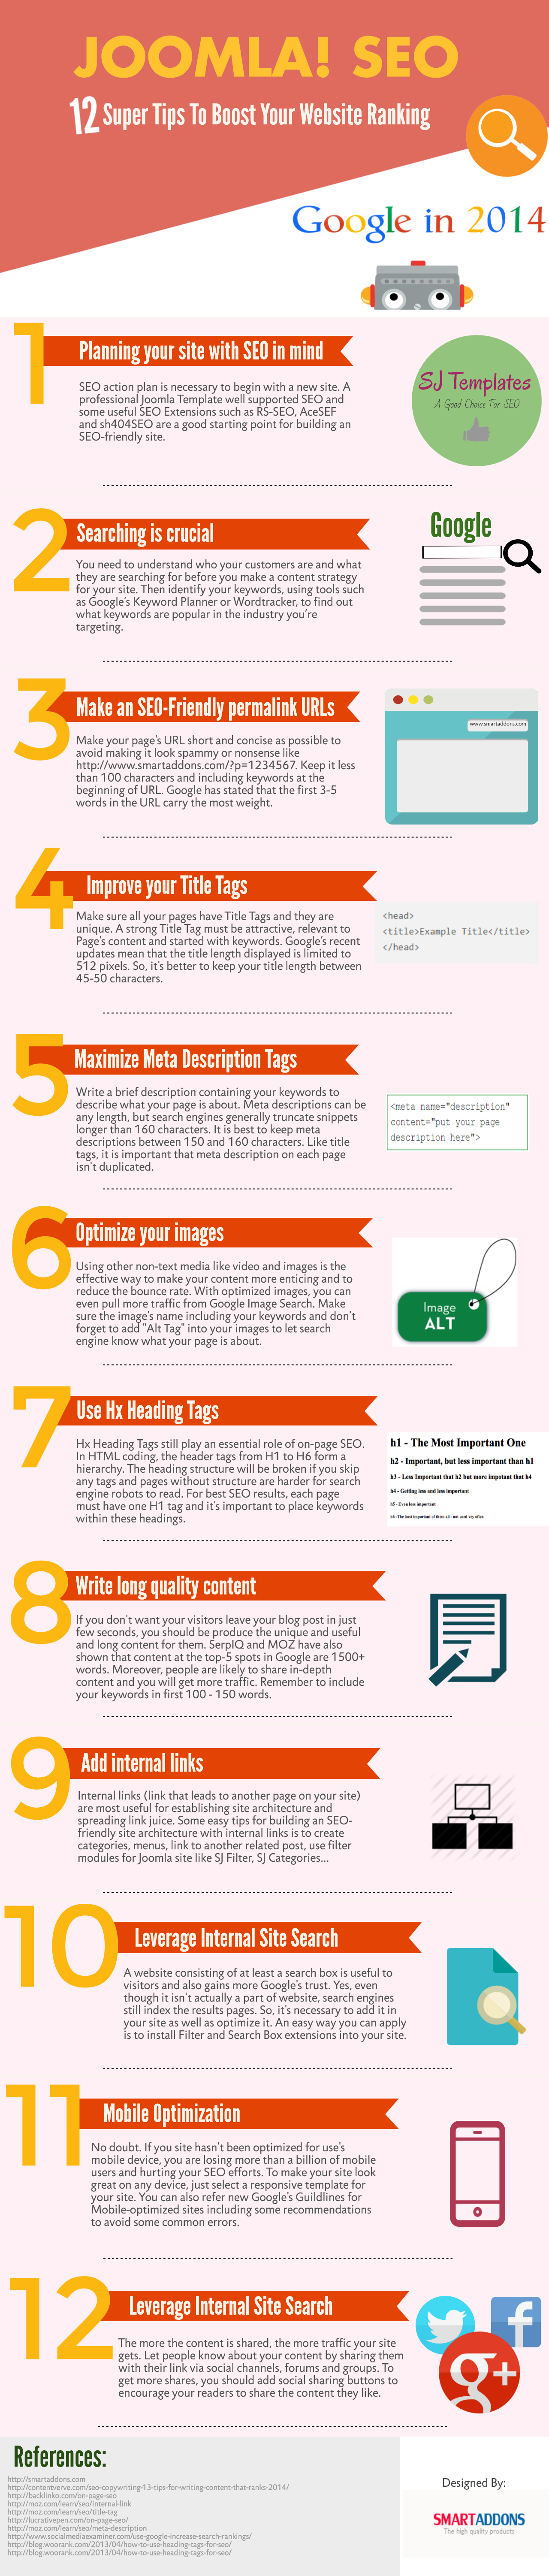 12 SEO Tips to Boost your Website Ranks